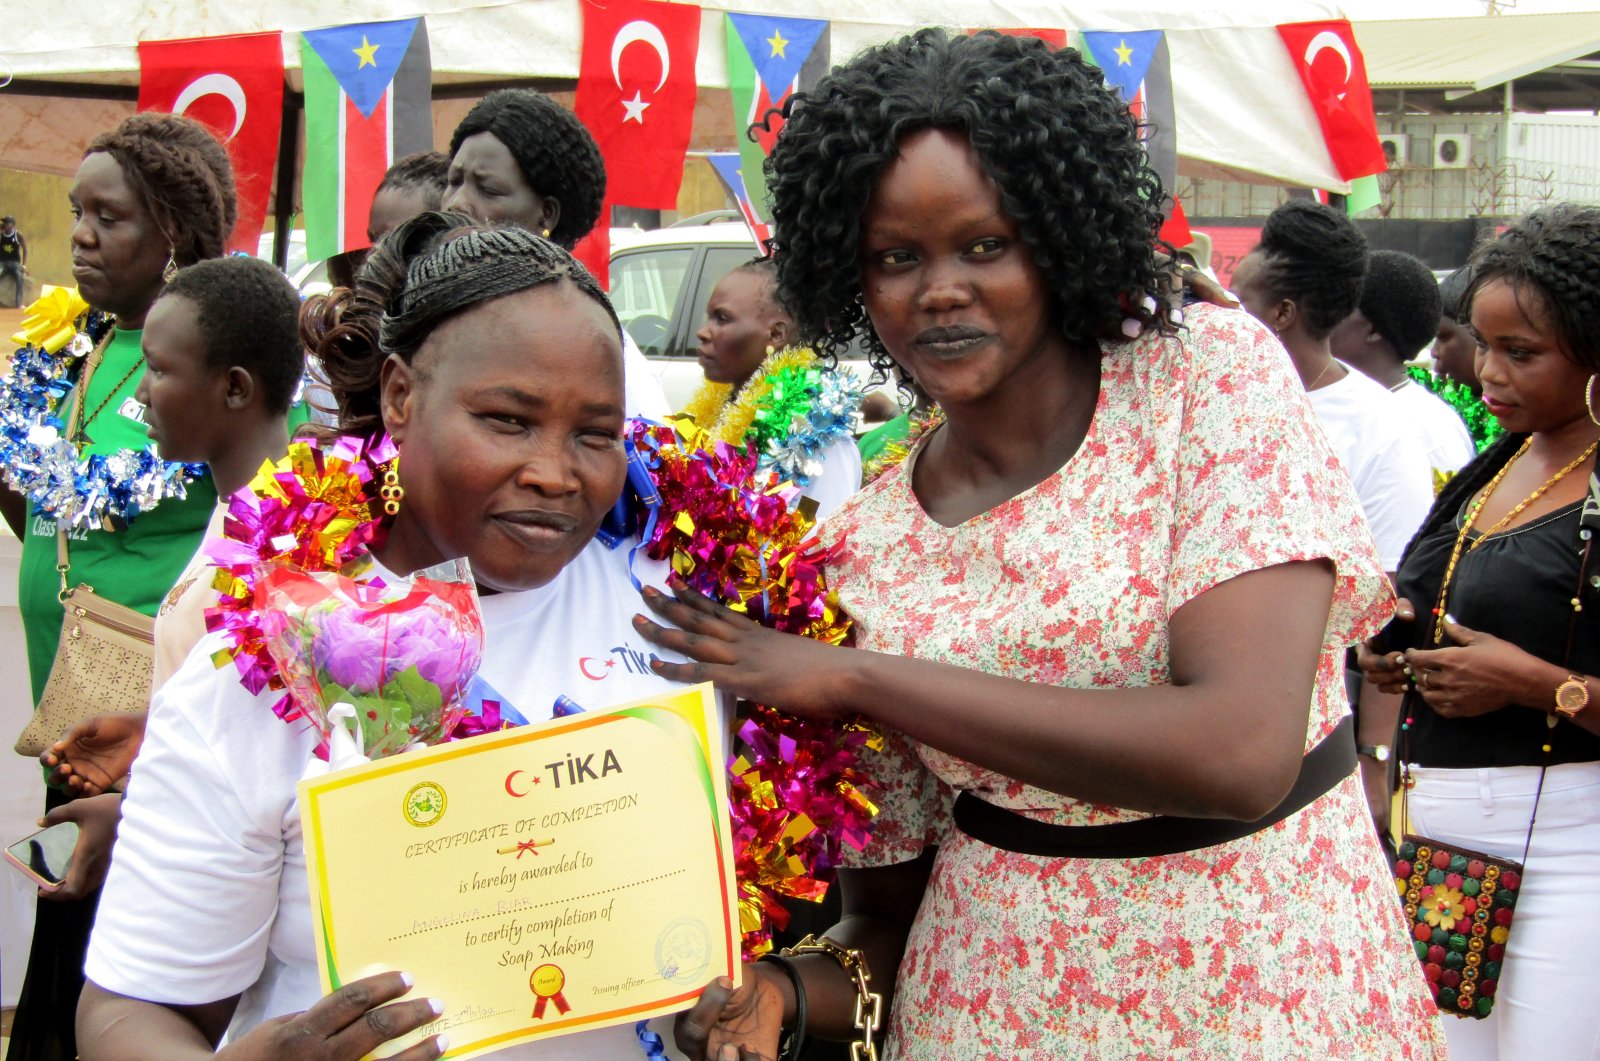 The Turkish Cooperation and Coordination Agency (TIKA) supports disadvantaged women in finding employment through the courses they provide, South Sudan, Nov. 4, 2022. (AA Photo)